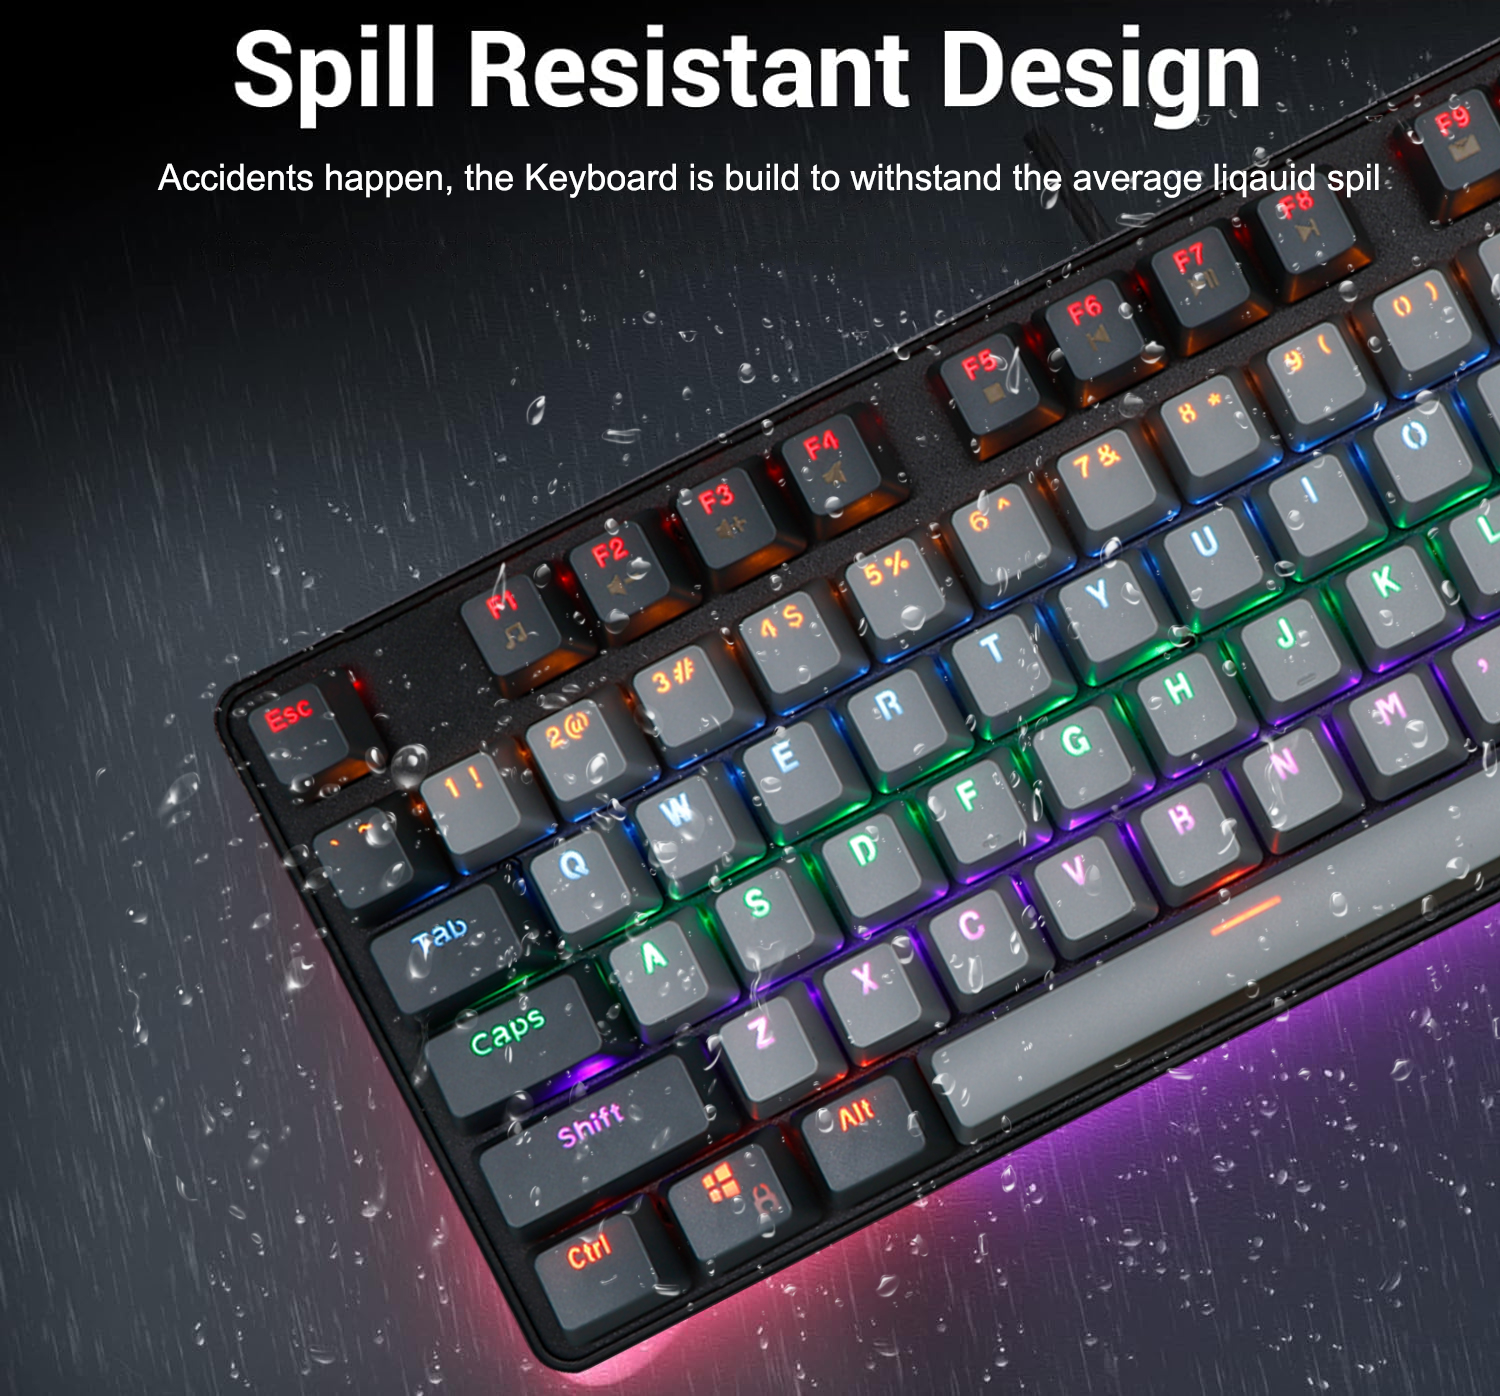 Keyboards-Gaming-Keyboard-Mechanical-Keyboard-Red-Switch-Hot-swappable-Tenkeyless-87-Keys-RGB-LED-Backlit-Wired-Computer-Keyboard-for-Gamer-Typists-Office-67